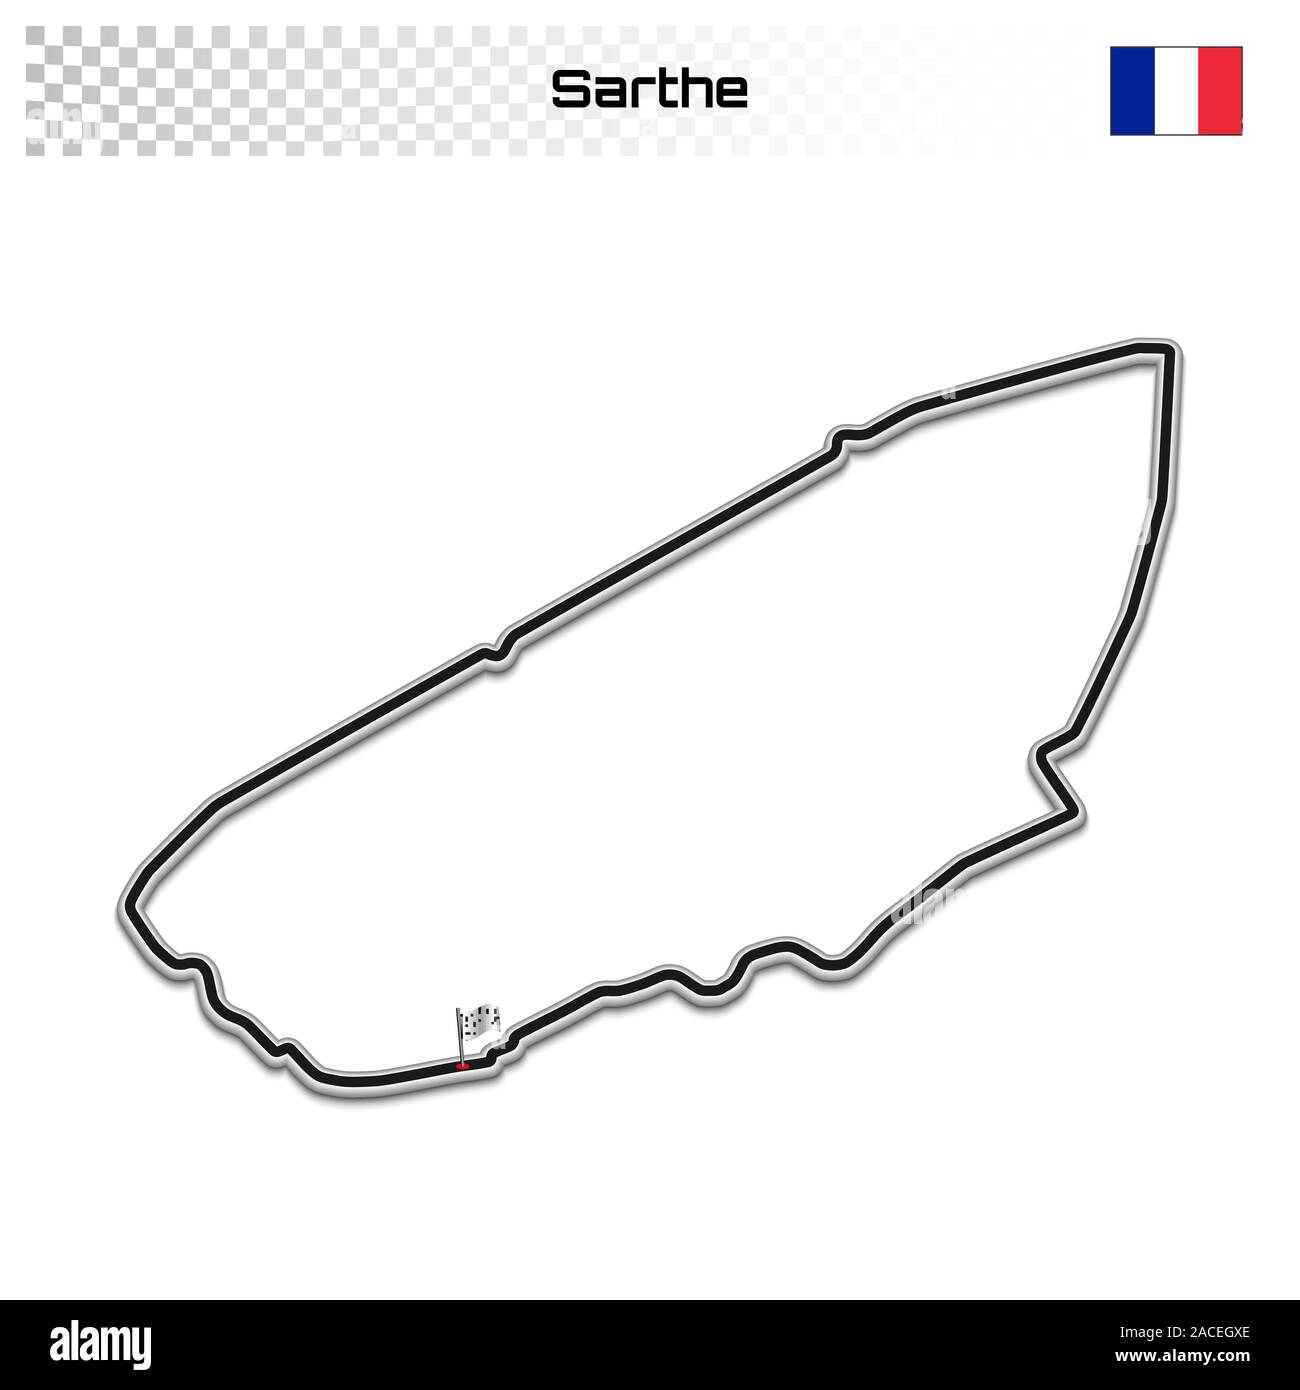 Sarthe circuit for motorsport and autosport. French grand prix race track. Stock Vector